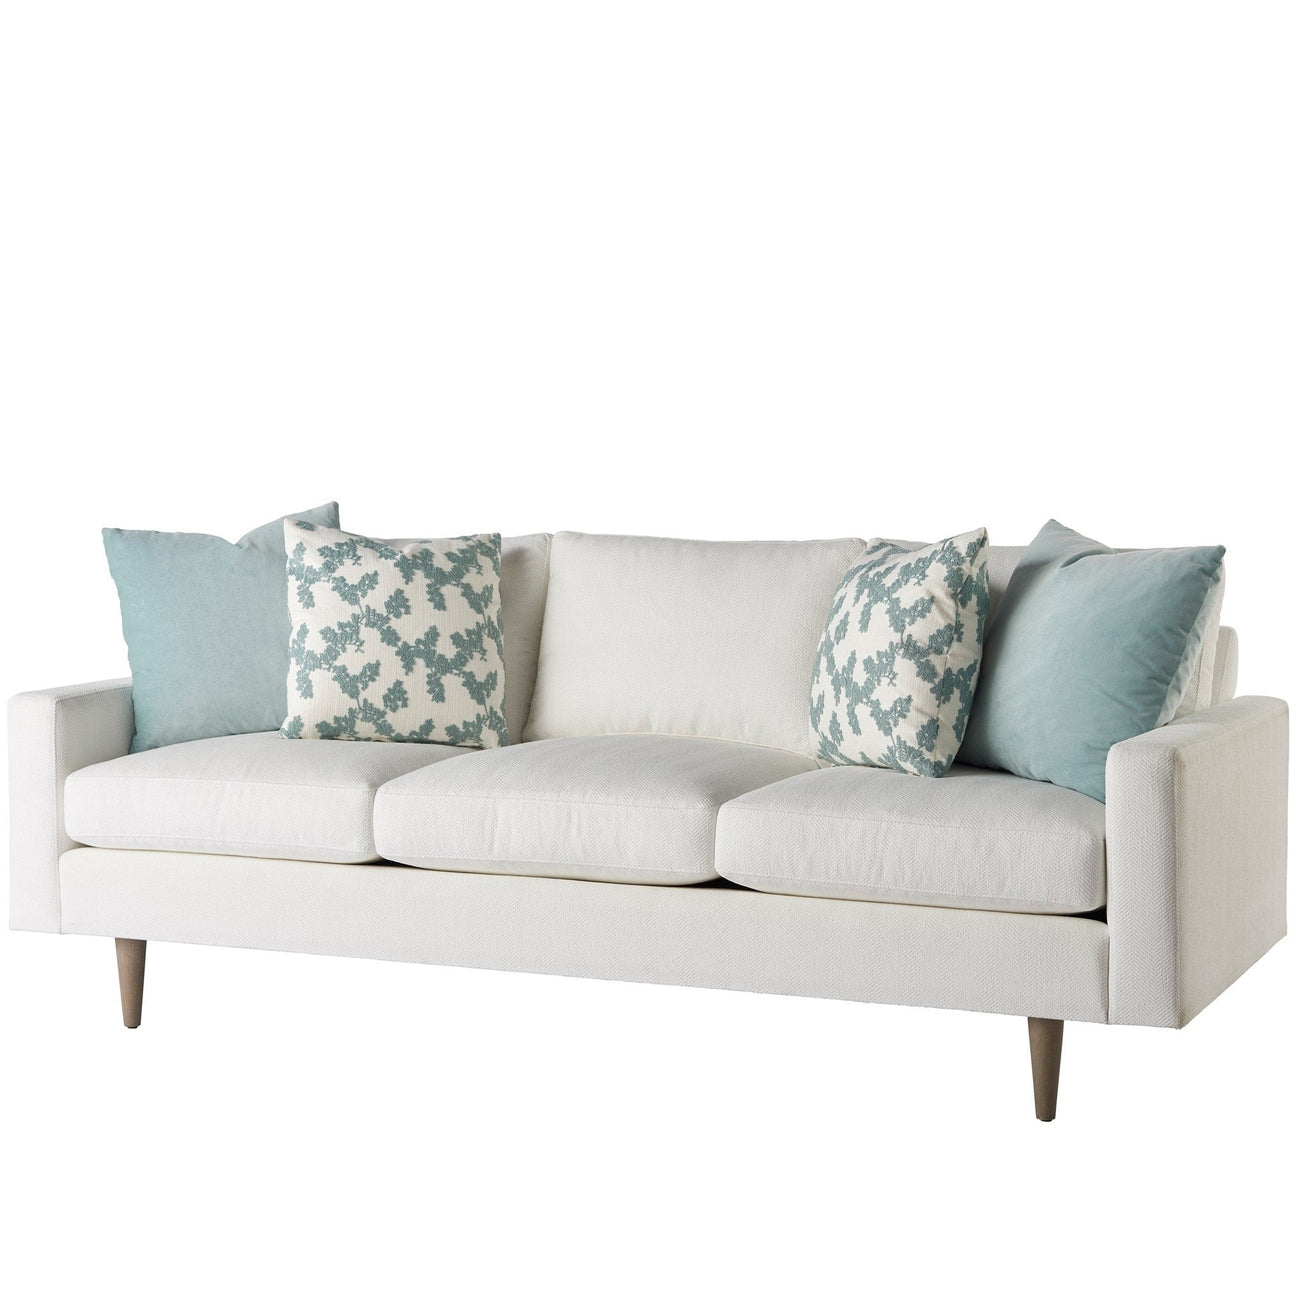 Brentwood Sofa - Love. Joy. Bliss. - Miranda Kerr Home Collection-Universal Furniture-UNIV-956501-960-Sofas-1-France and Son